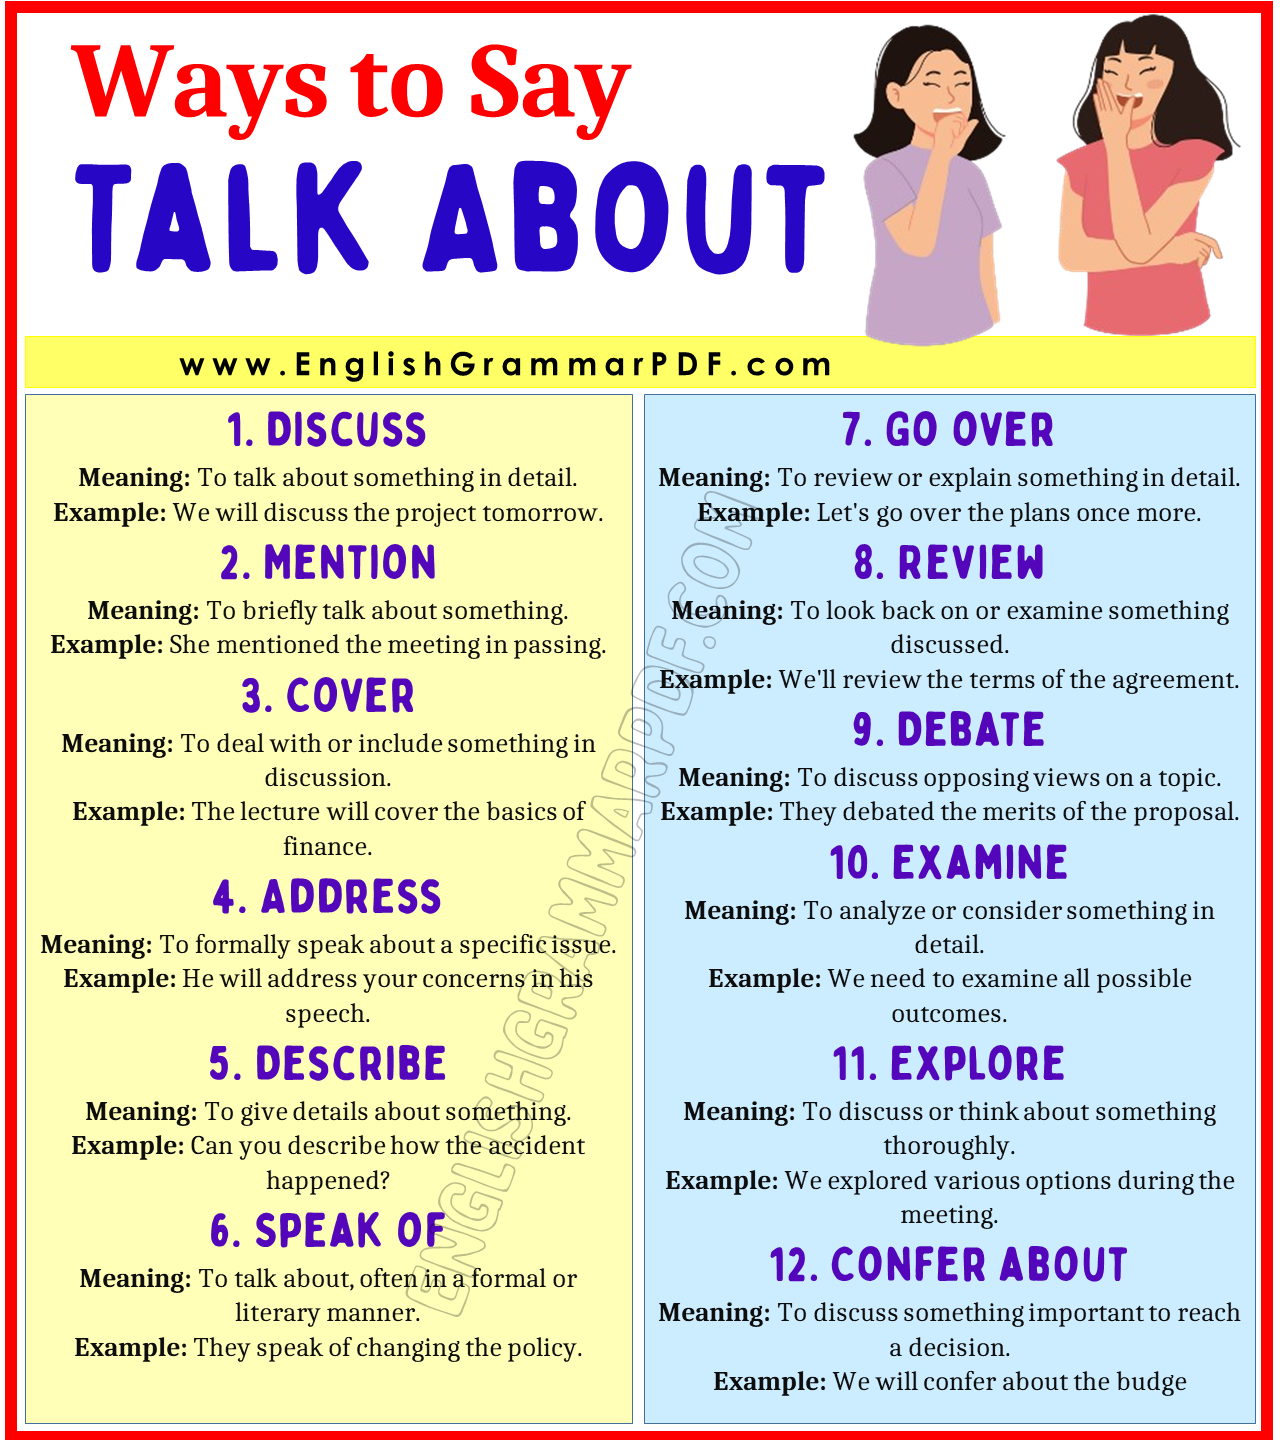 Ways to Say Talk About